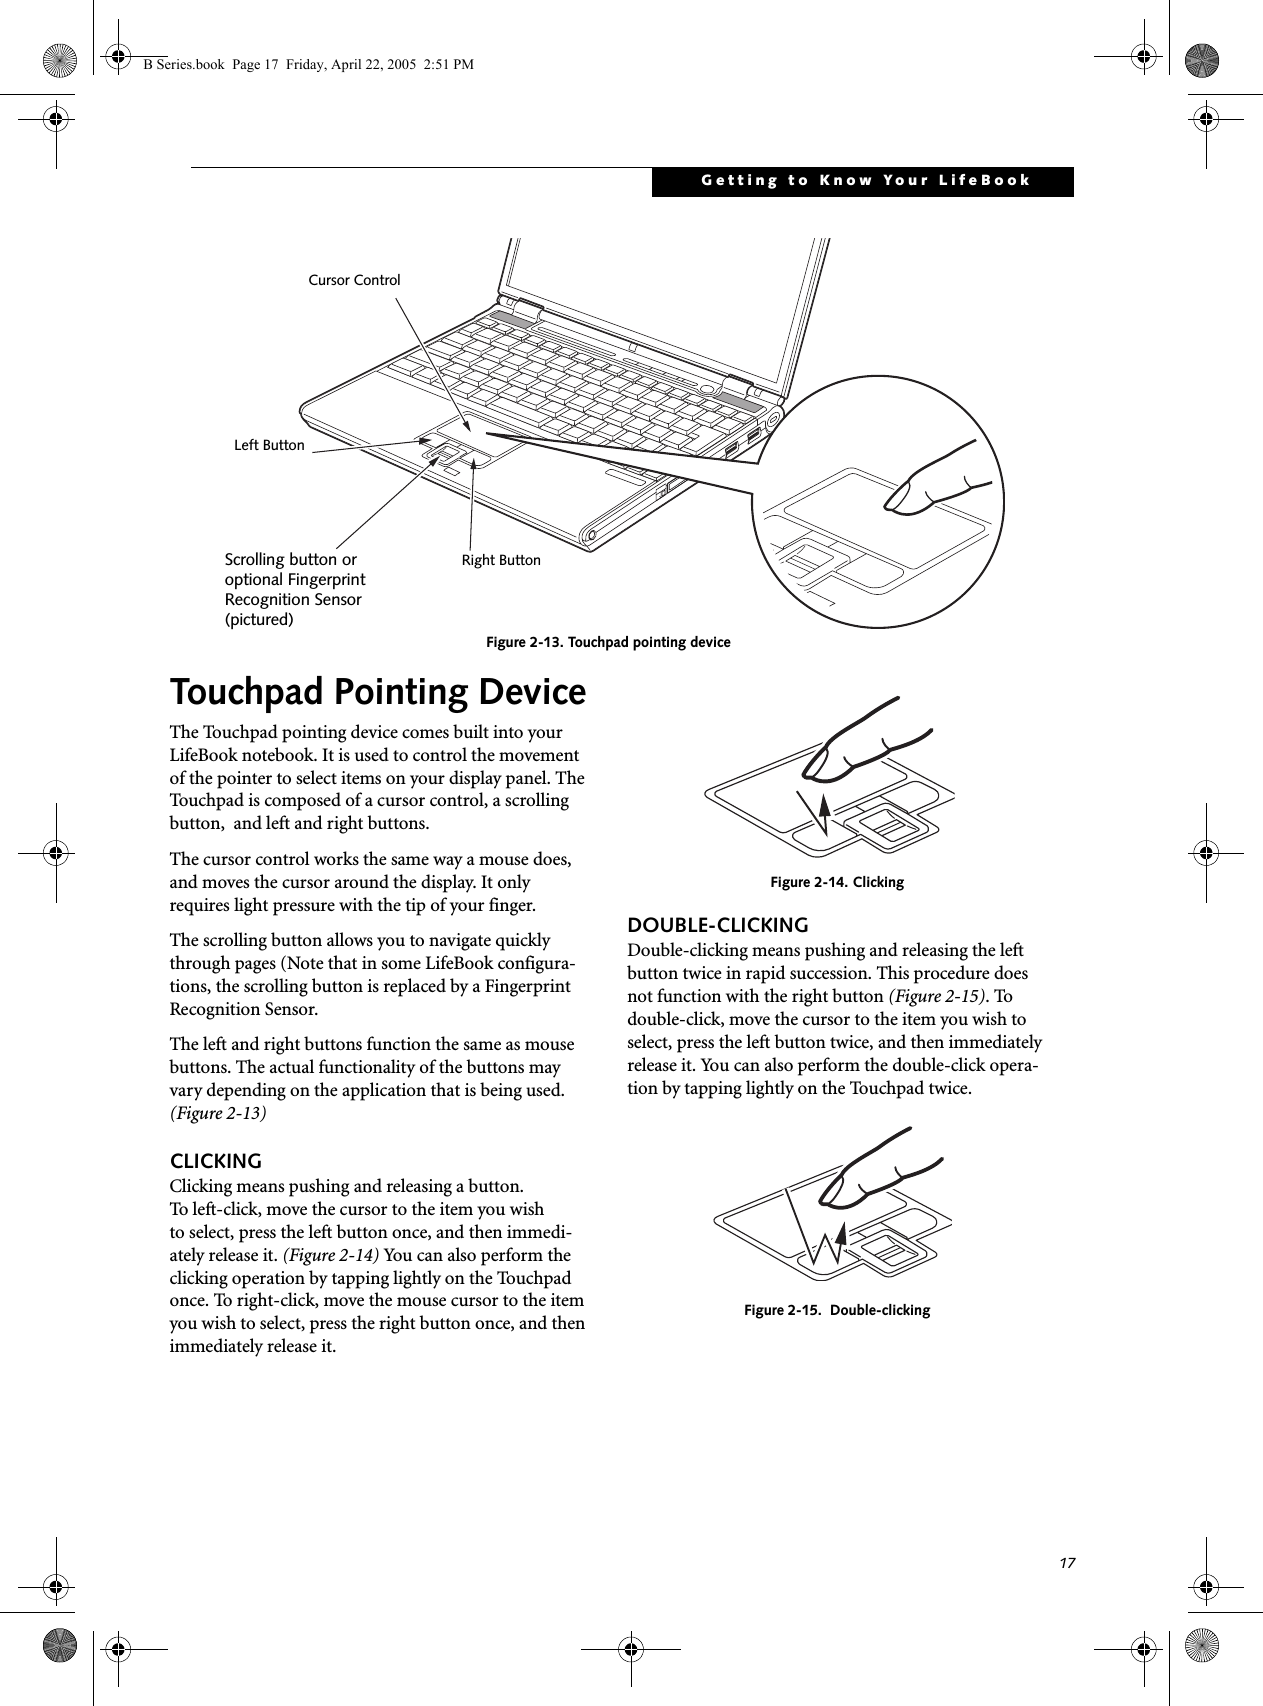 17Getting to Know Your LifeBookFigure 2-13. Touchpad pointing deviceTouchpad Pointing DeviceThe Touchpad pointing device comes built into your LifeBook notebook. It is used to control the movement of the pointer to select items on your display panel. The Touchpad is composed of a cursor control, a scrolling button,  and left and right buttons. The cursor control works the same way a mouse does, and moves the cursor around the display. It only requires light pressure with the tip of your finger. The scrolling button allows you to navigate quickly through pages (Note that in some LifeBook configura-tions, the scrolling button is replaced by a Fingerprint Recognition Sensor. The left and right buttons function the same as mouse buttons. The actual functionality of the buttons may vary depending on the application that is being used. (Figure 2-13)CLICKINGClicking means pushing and releasing a button. To left-click, move the cursor to the item you wishto select, press the left button once, and then immedi-ately release it. (Figure 2-14) You can also perform the clicking operation by tapping lightly on the Touchpad once. To right-click, move the mouse cursor to the item you wish to select, press the right button once, and then immediately release it. Figure 2-14. ClickingDOUBLE-CLICKINGDouble-clicking means pushing and releasing the left button twice in rapid succession. This procedure does not function with the right button (Figure 2-15). To double-click, move the cursor to the item you wish to select, press the left button twice, and then immediately release it. You can also perform the double-click opera-tion by tapping lightly on the Touchpad twice.Figure 2-15.  Double-clickingCursor ControlLeft ButtonRight ButtonScrolling button oroptional FingerprintRecognition Sensor(pictured)B Series.book  Page 17  Friday, April 22, 2005  2:51 PM